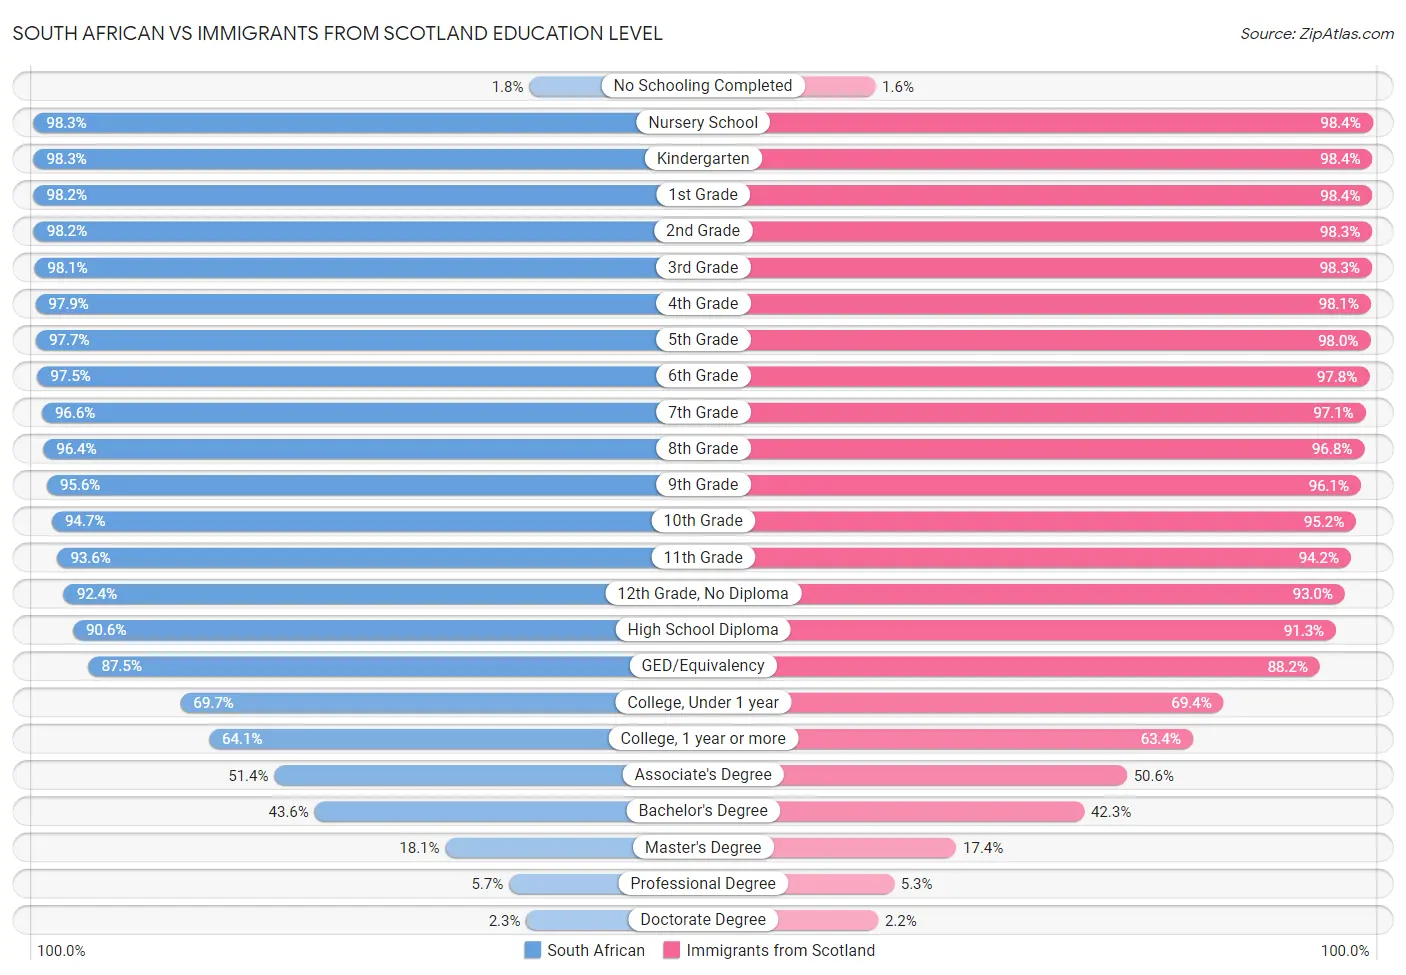 South African vs Immigrants from Scotland Education Level